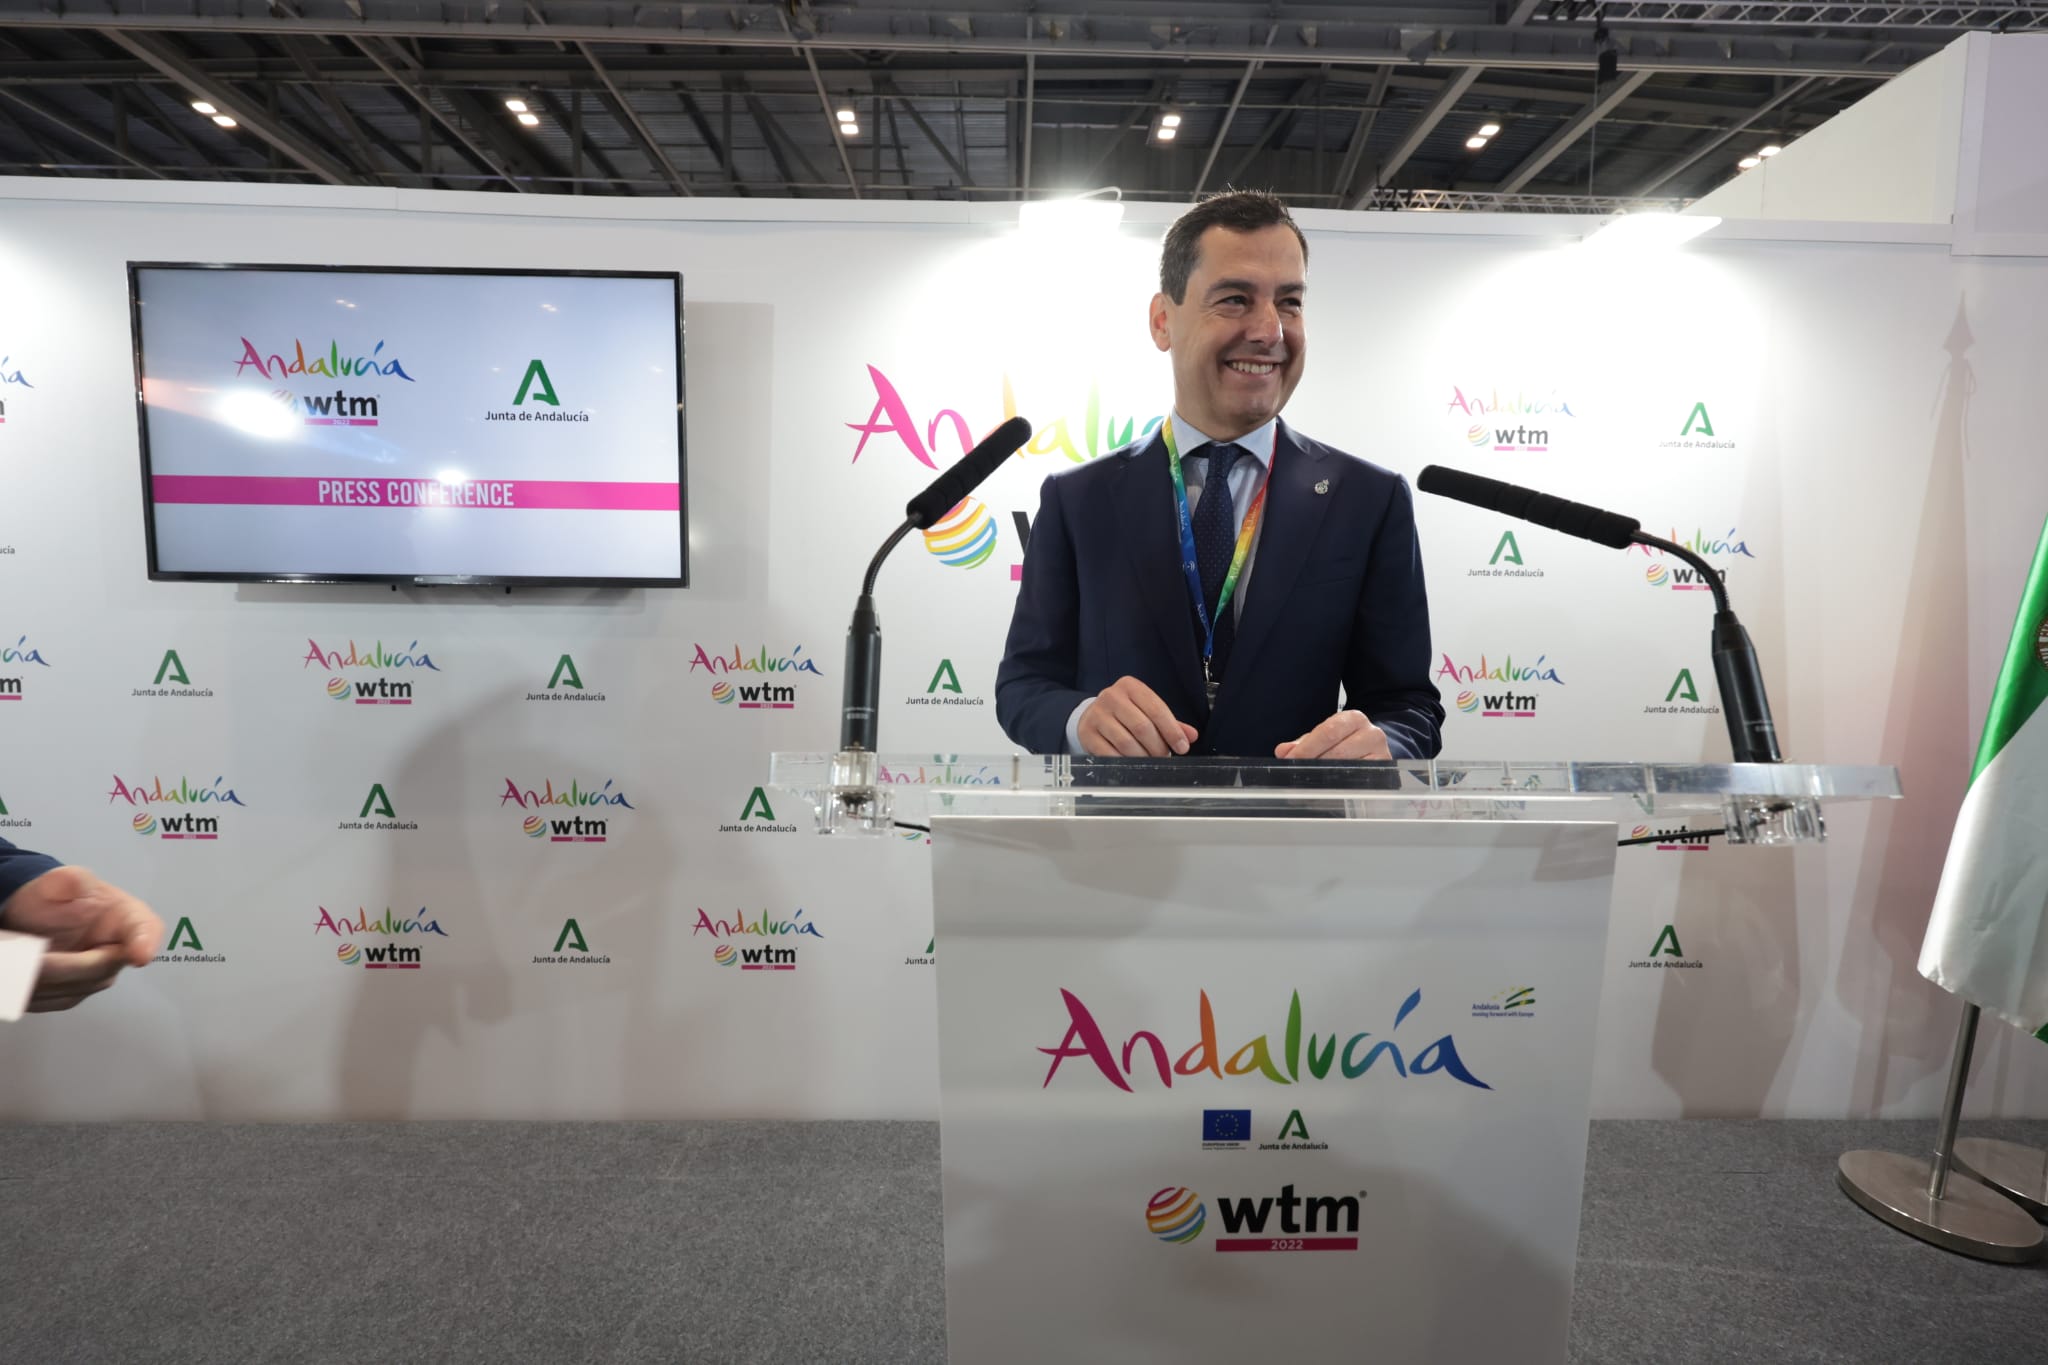 Andalucía, the Costa del Sol, Malaga and the main tourist resorts of southern Spain are the ExCel centre London this week with one common aim: to make sure 2023 is the year of the total recovery of British tourism.